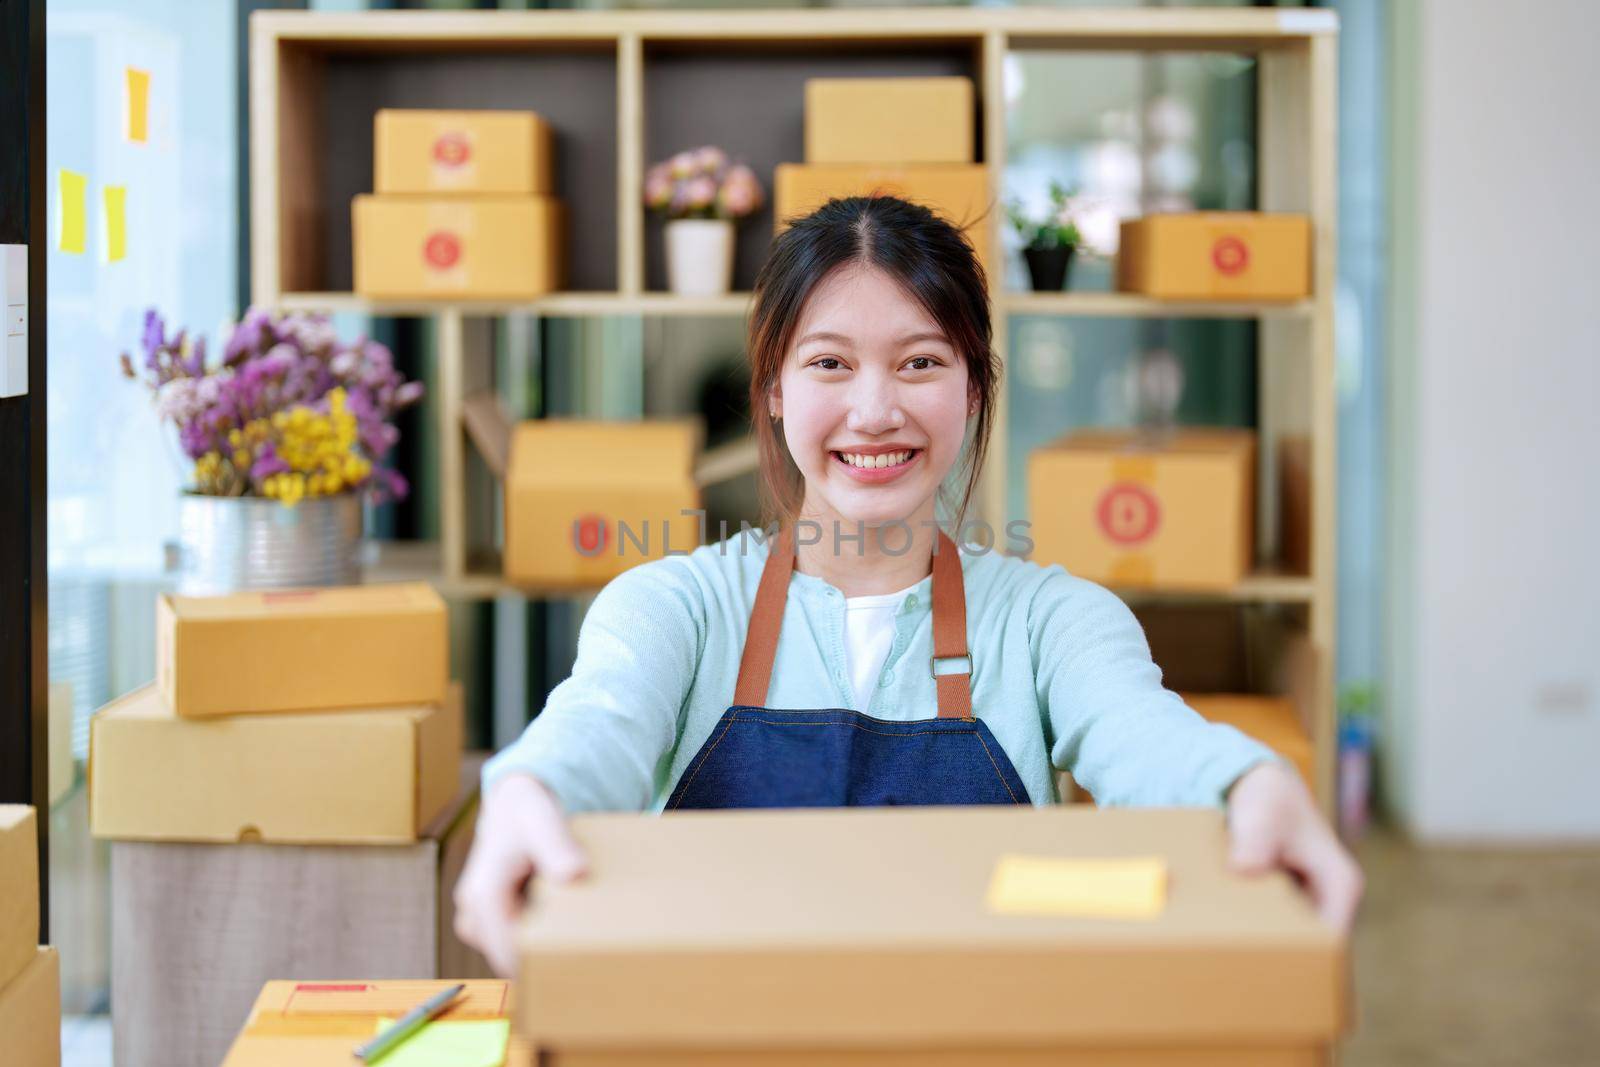 Portrait of a business woman, sme packing products in boxes and showing delivery to customers according to their orders by Manastrong